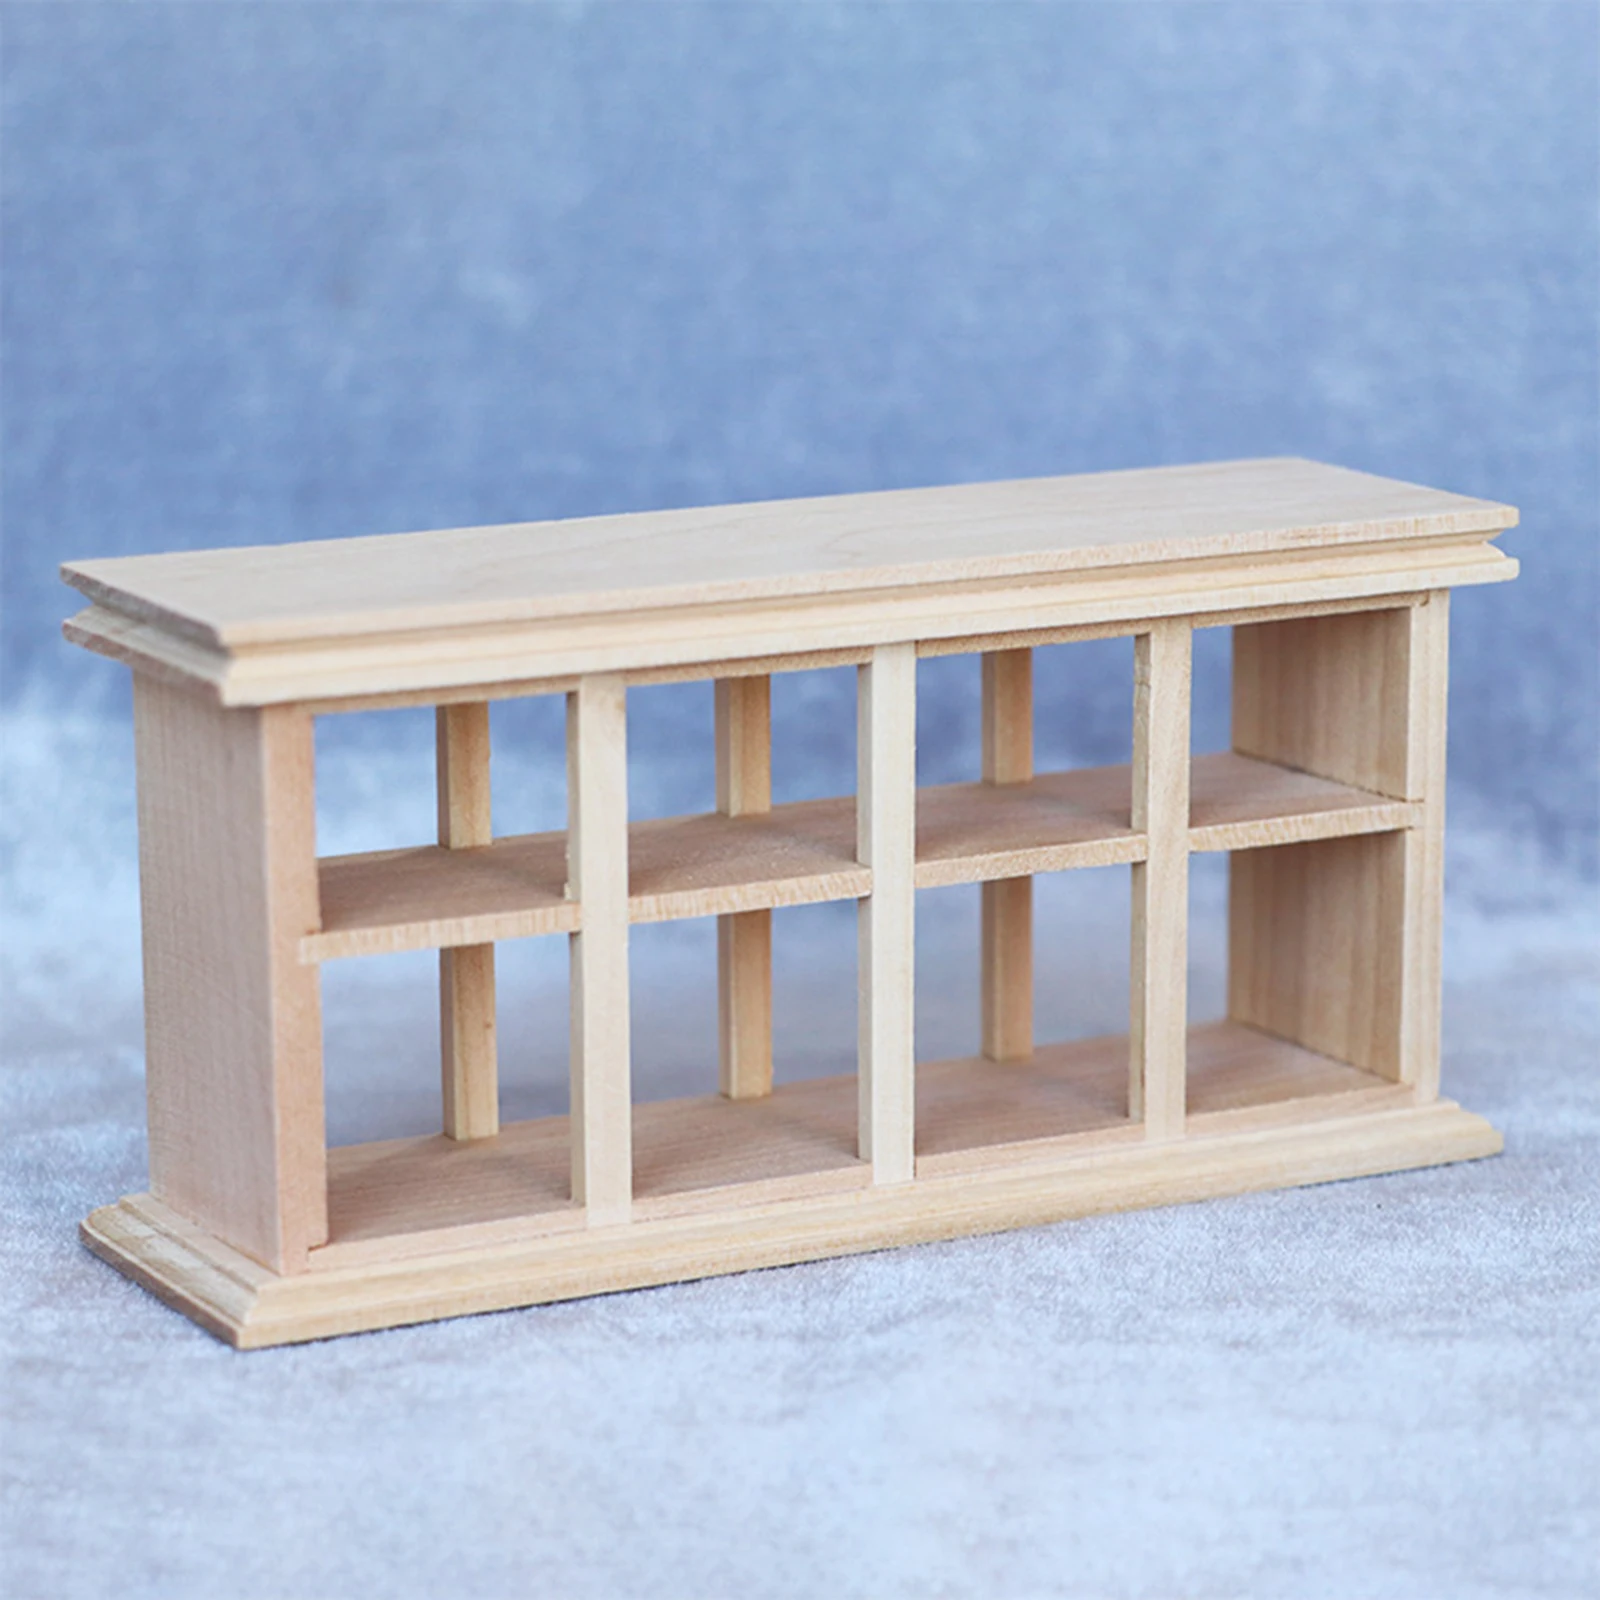 Wood Bakery Lattice Cabinet for 1/12 Doll House Furniture Accessory DIY